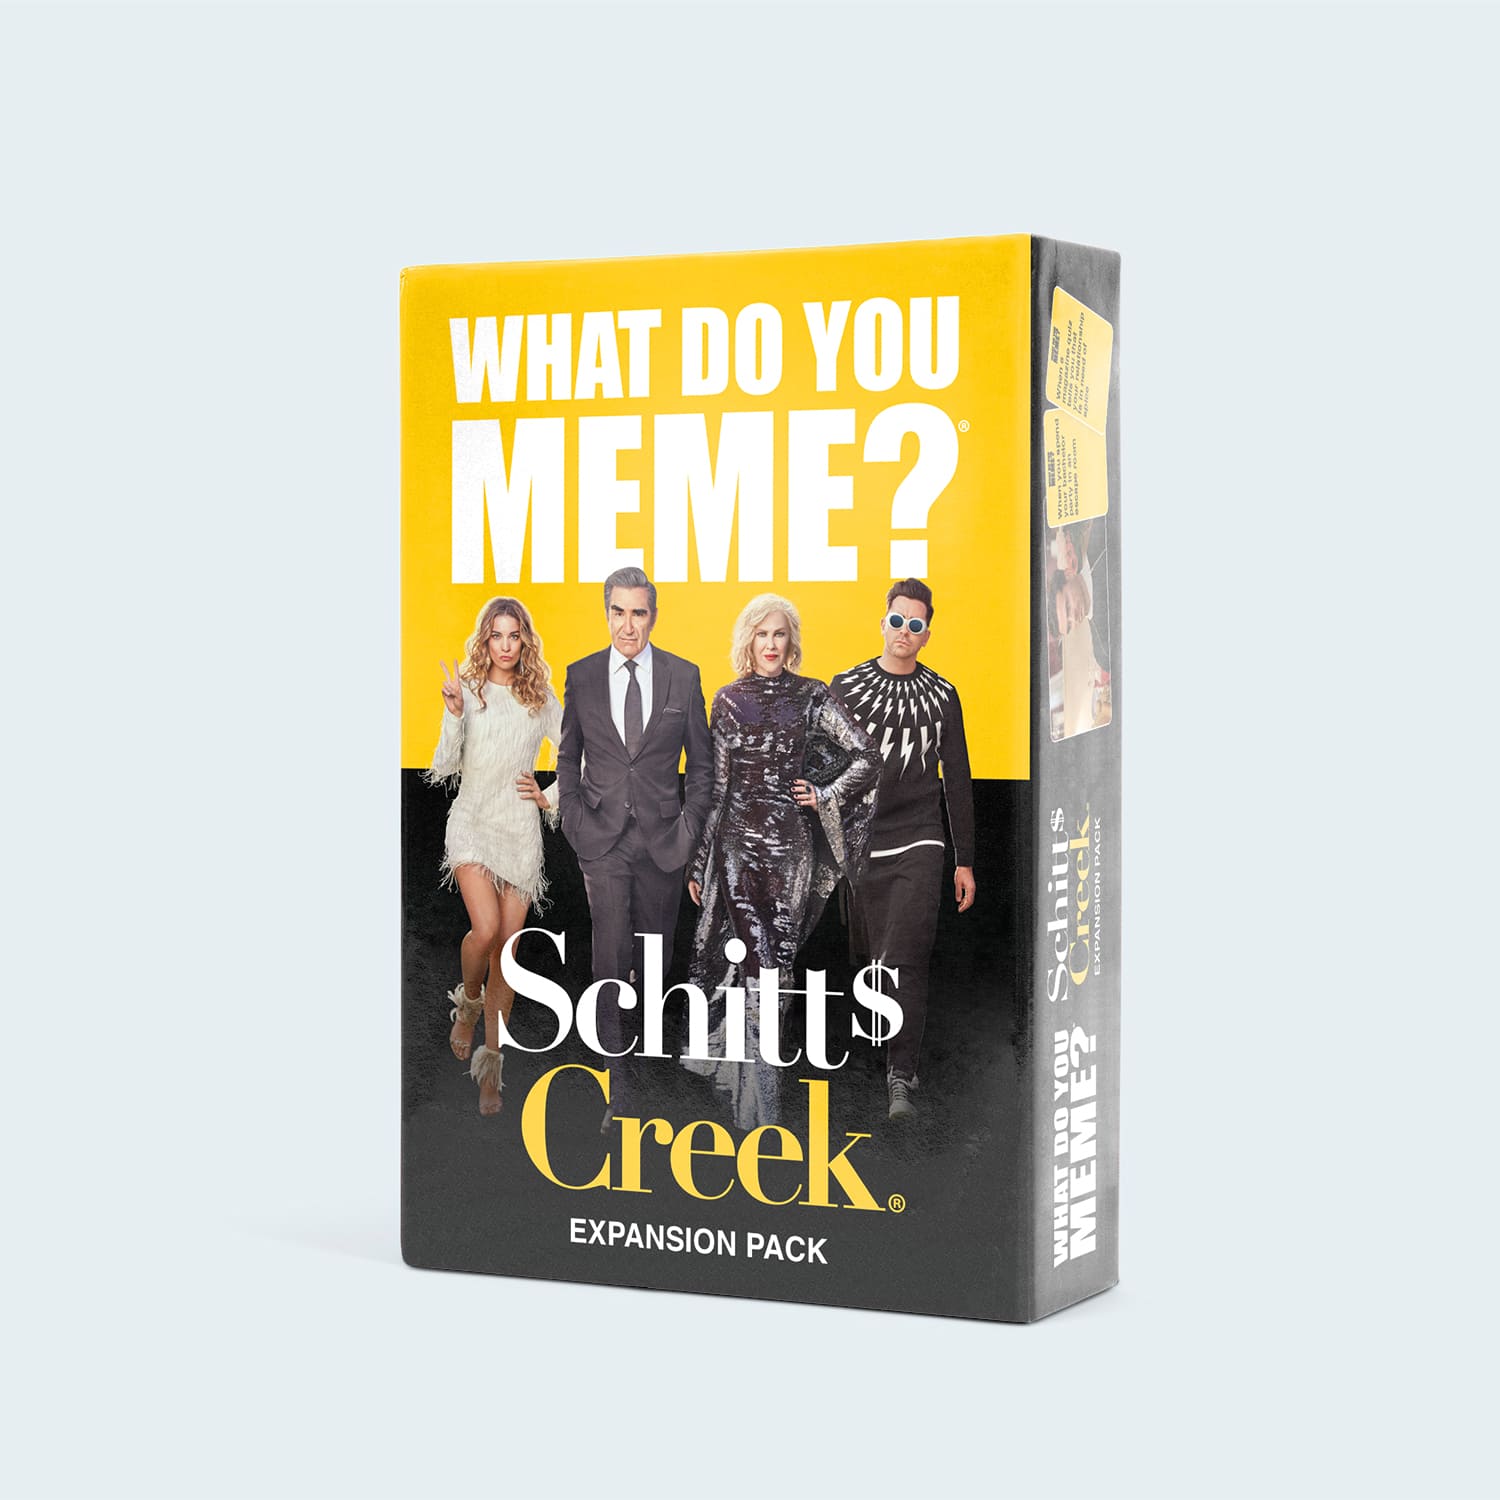 what-do-you-meme-schitt-s-creek-expansion-pack-game-box-and-game-play-03-what-do-you-meme-by-relatable